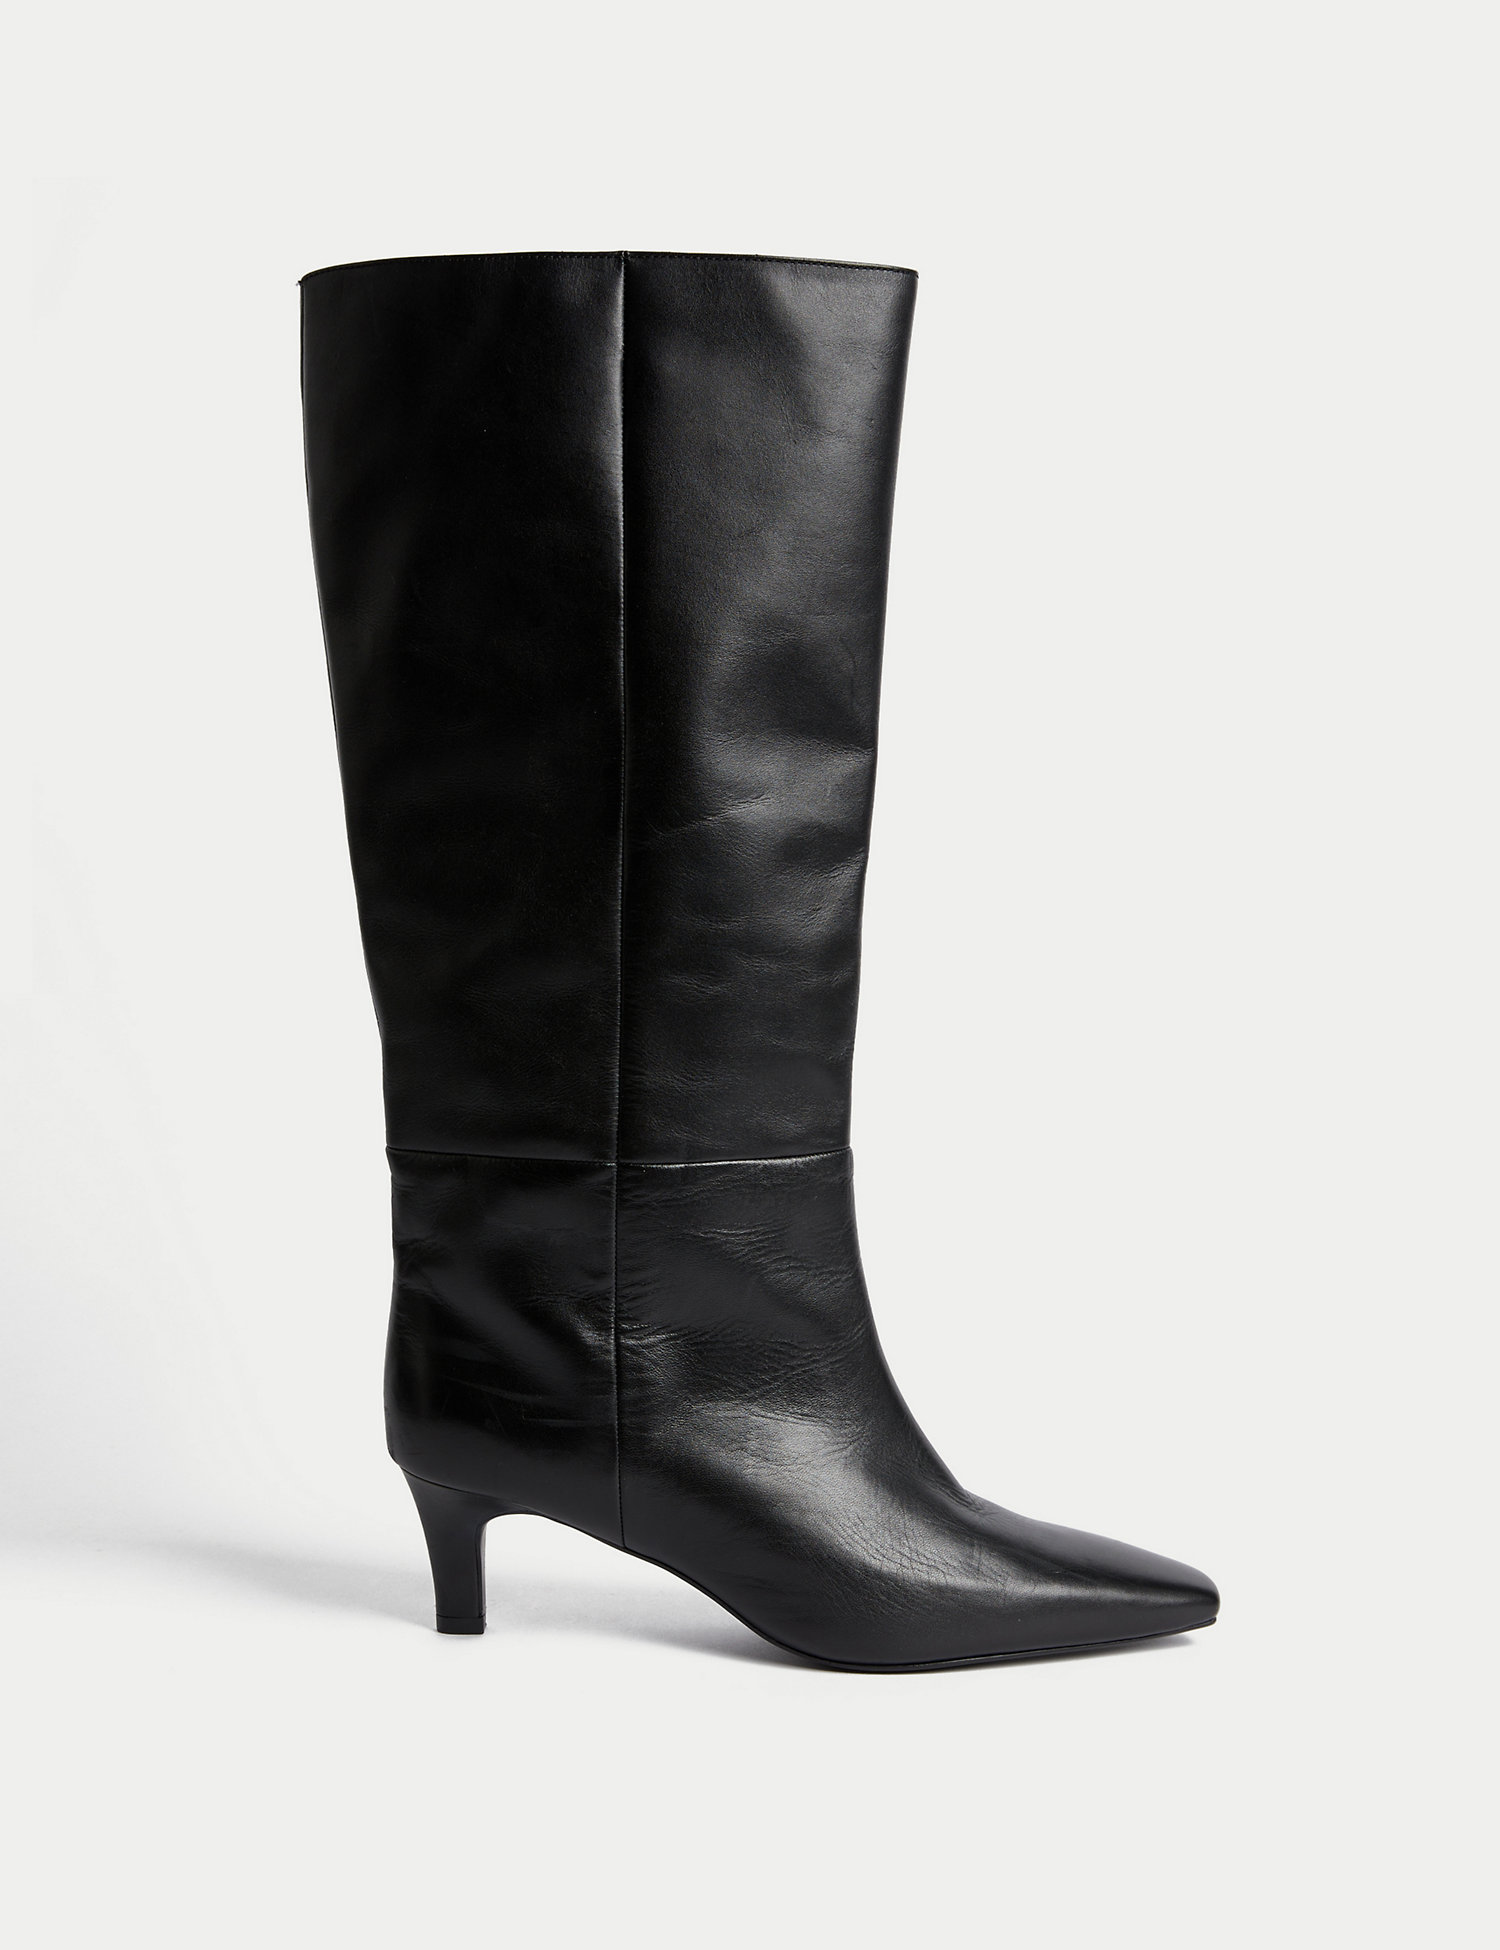 I Honestly Can't Resist Winter Boots from M&S—Here Are My Favourites